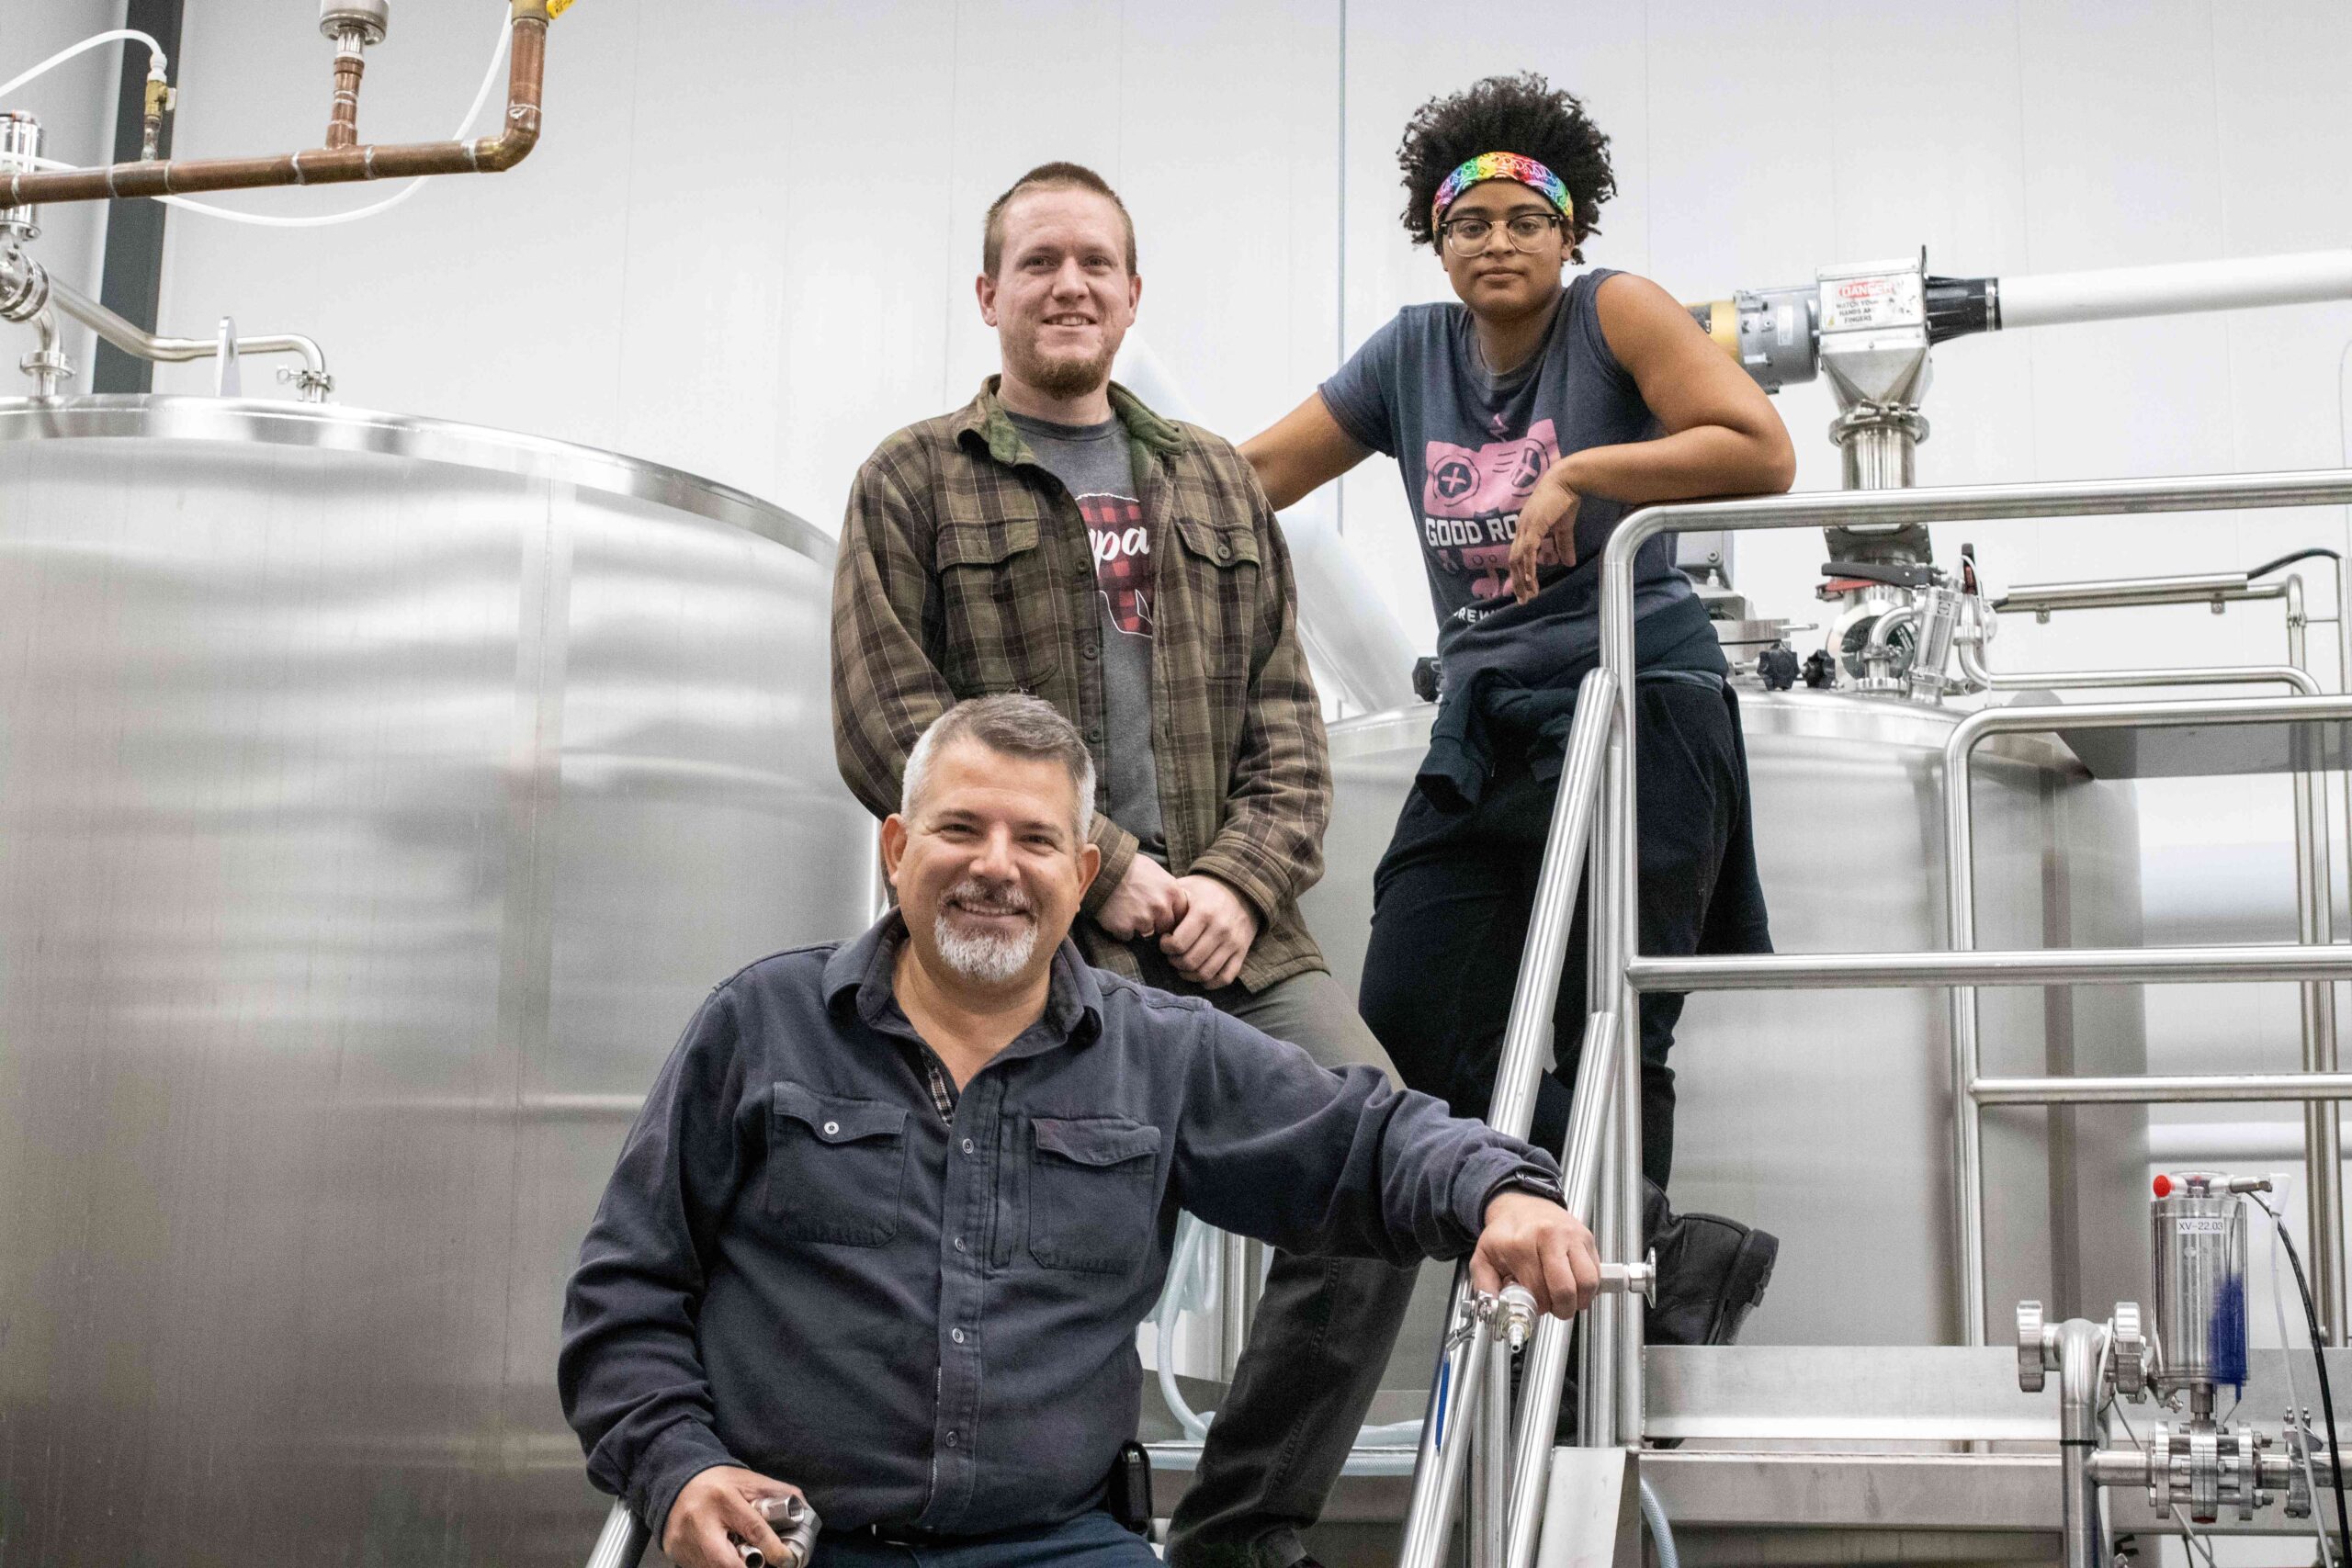 Three people stand smiling on steps next to stainless steel brewing equipment